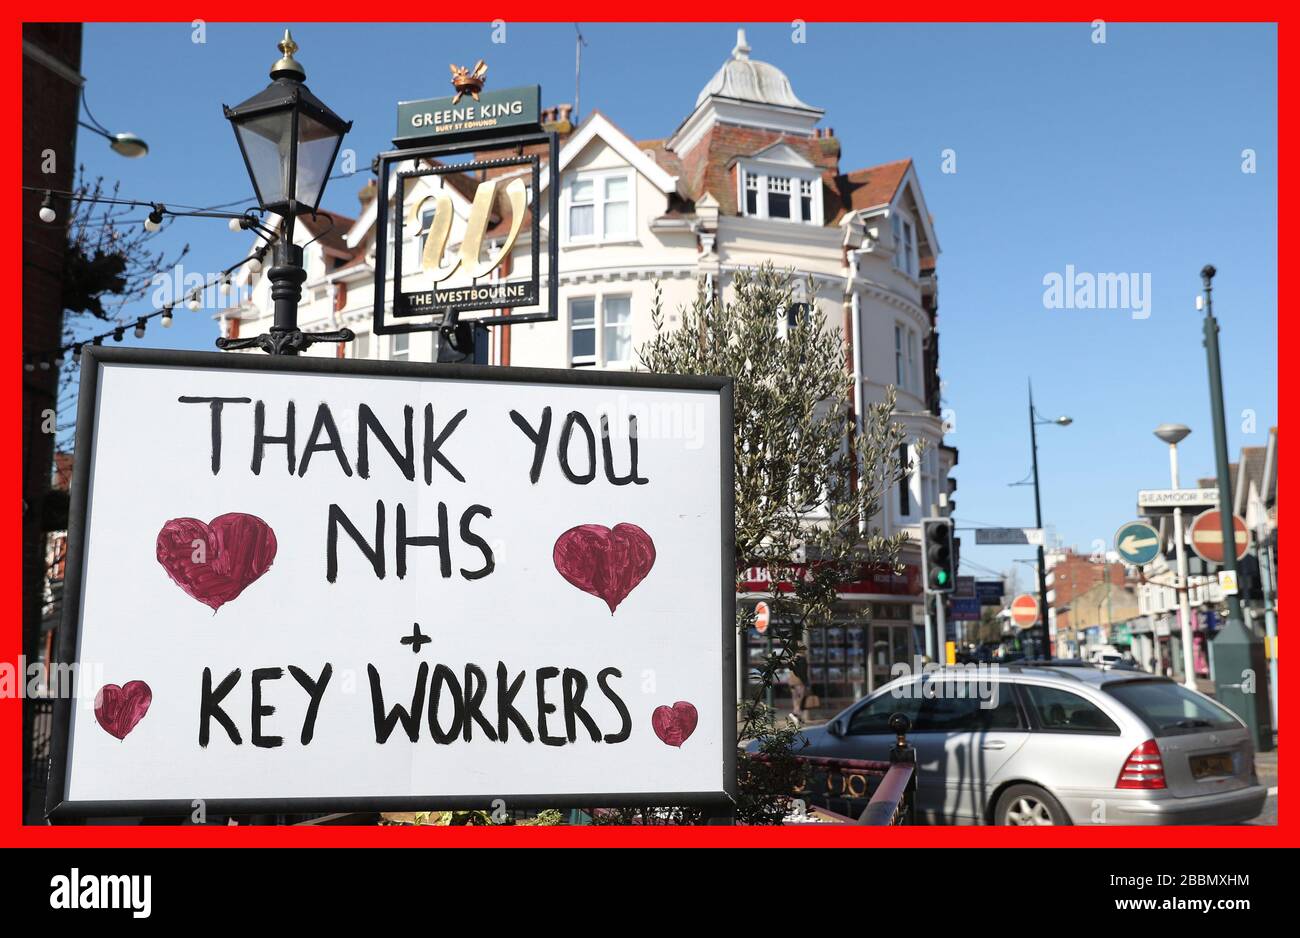 PABEST A sign thanking NHS staff and key workers is displayed outside The Westbourne pub in Bournemouth, as the UK continues in lockdown to help curb the spread of the coronavirus. PA Photo. Picture date: Wednesday April 1, 2020. Tuesday saw the UK's biggest day-on-day rise in the number of deaths since the outbreak began - up 381 to a total of 1,789. See PA story HEALTH Coronavirus. Photo credit should read: Andrew Matthews/PA Wire Stock Photo